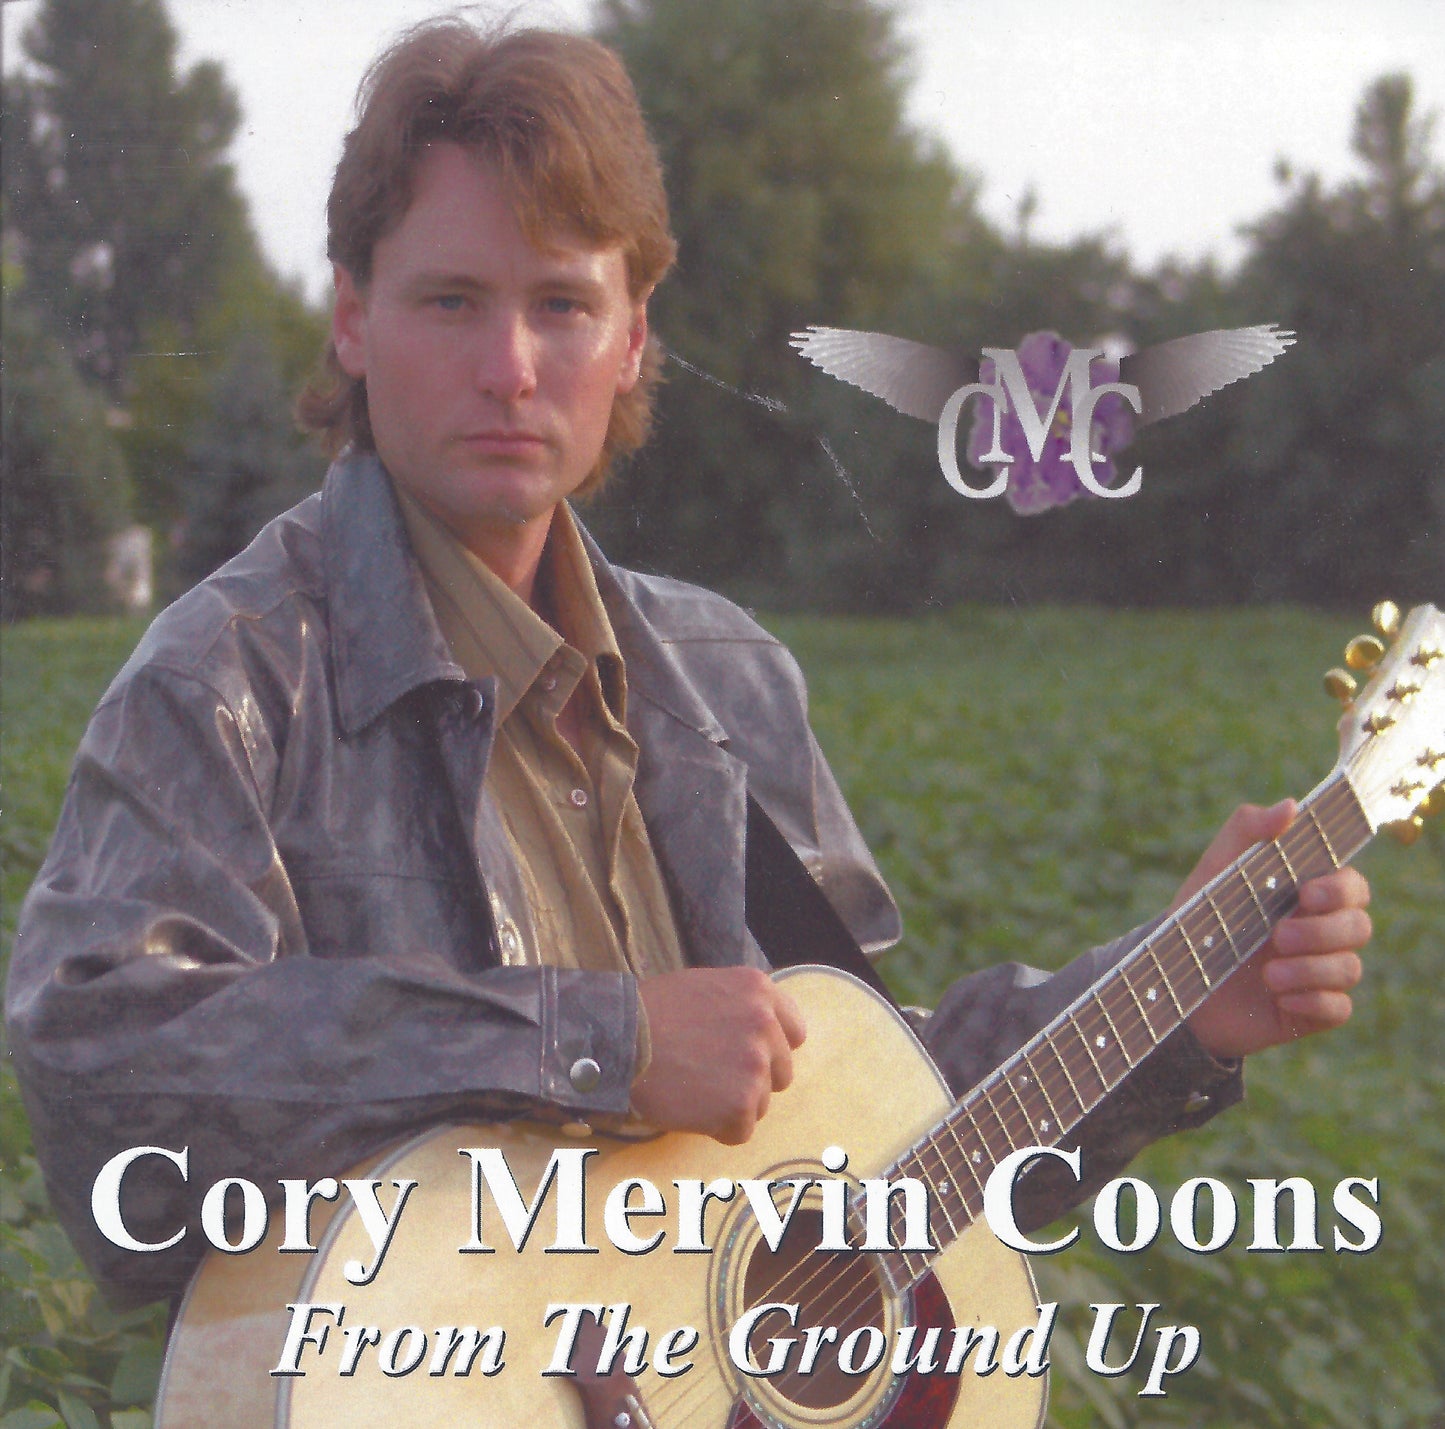 Love Don't Come Easy - Cory Mervin Coons